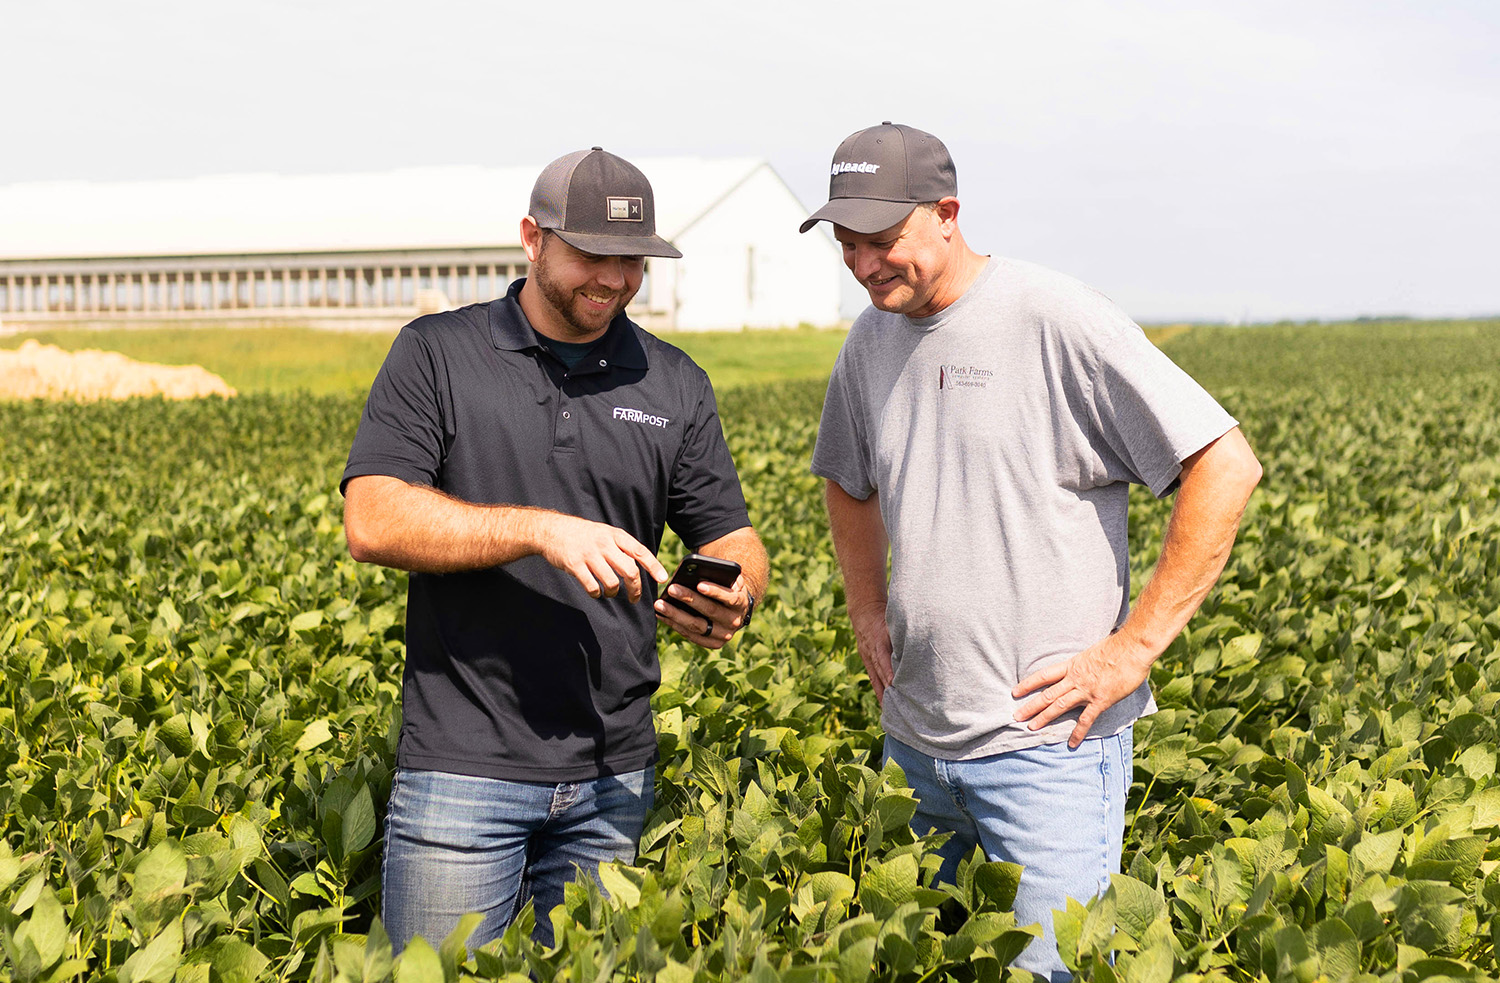 Soybean growers looking for labor through an app